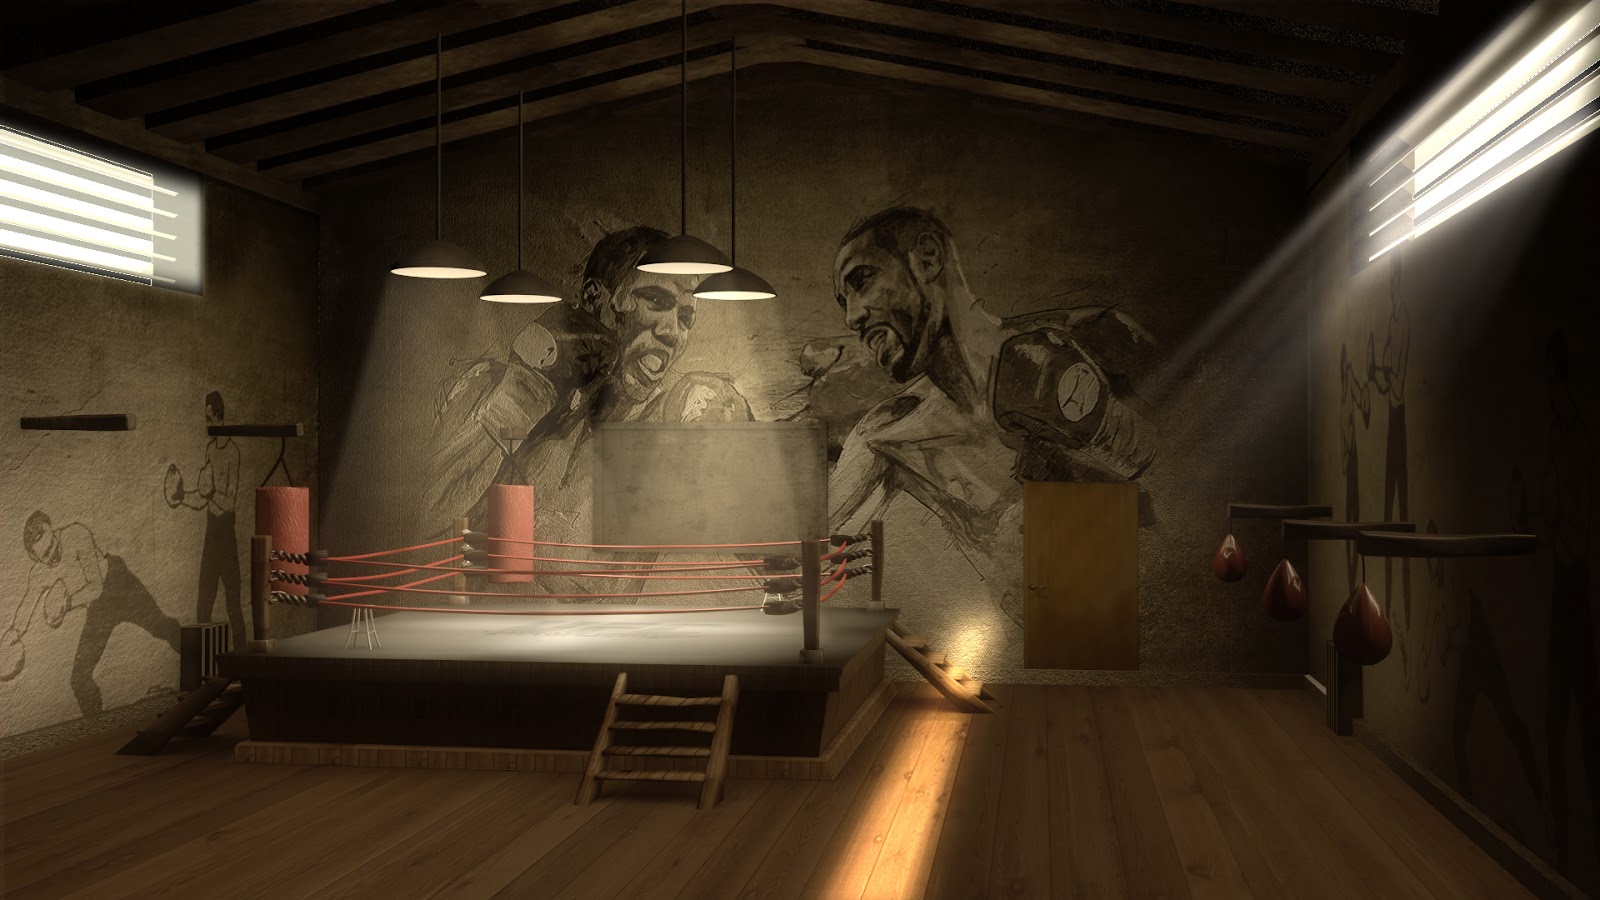 A room with two boxing rings and light - Gym